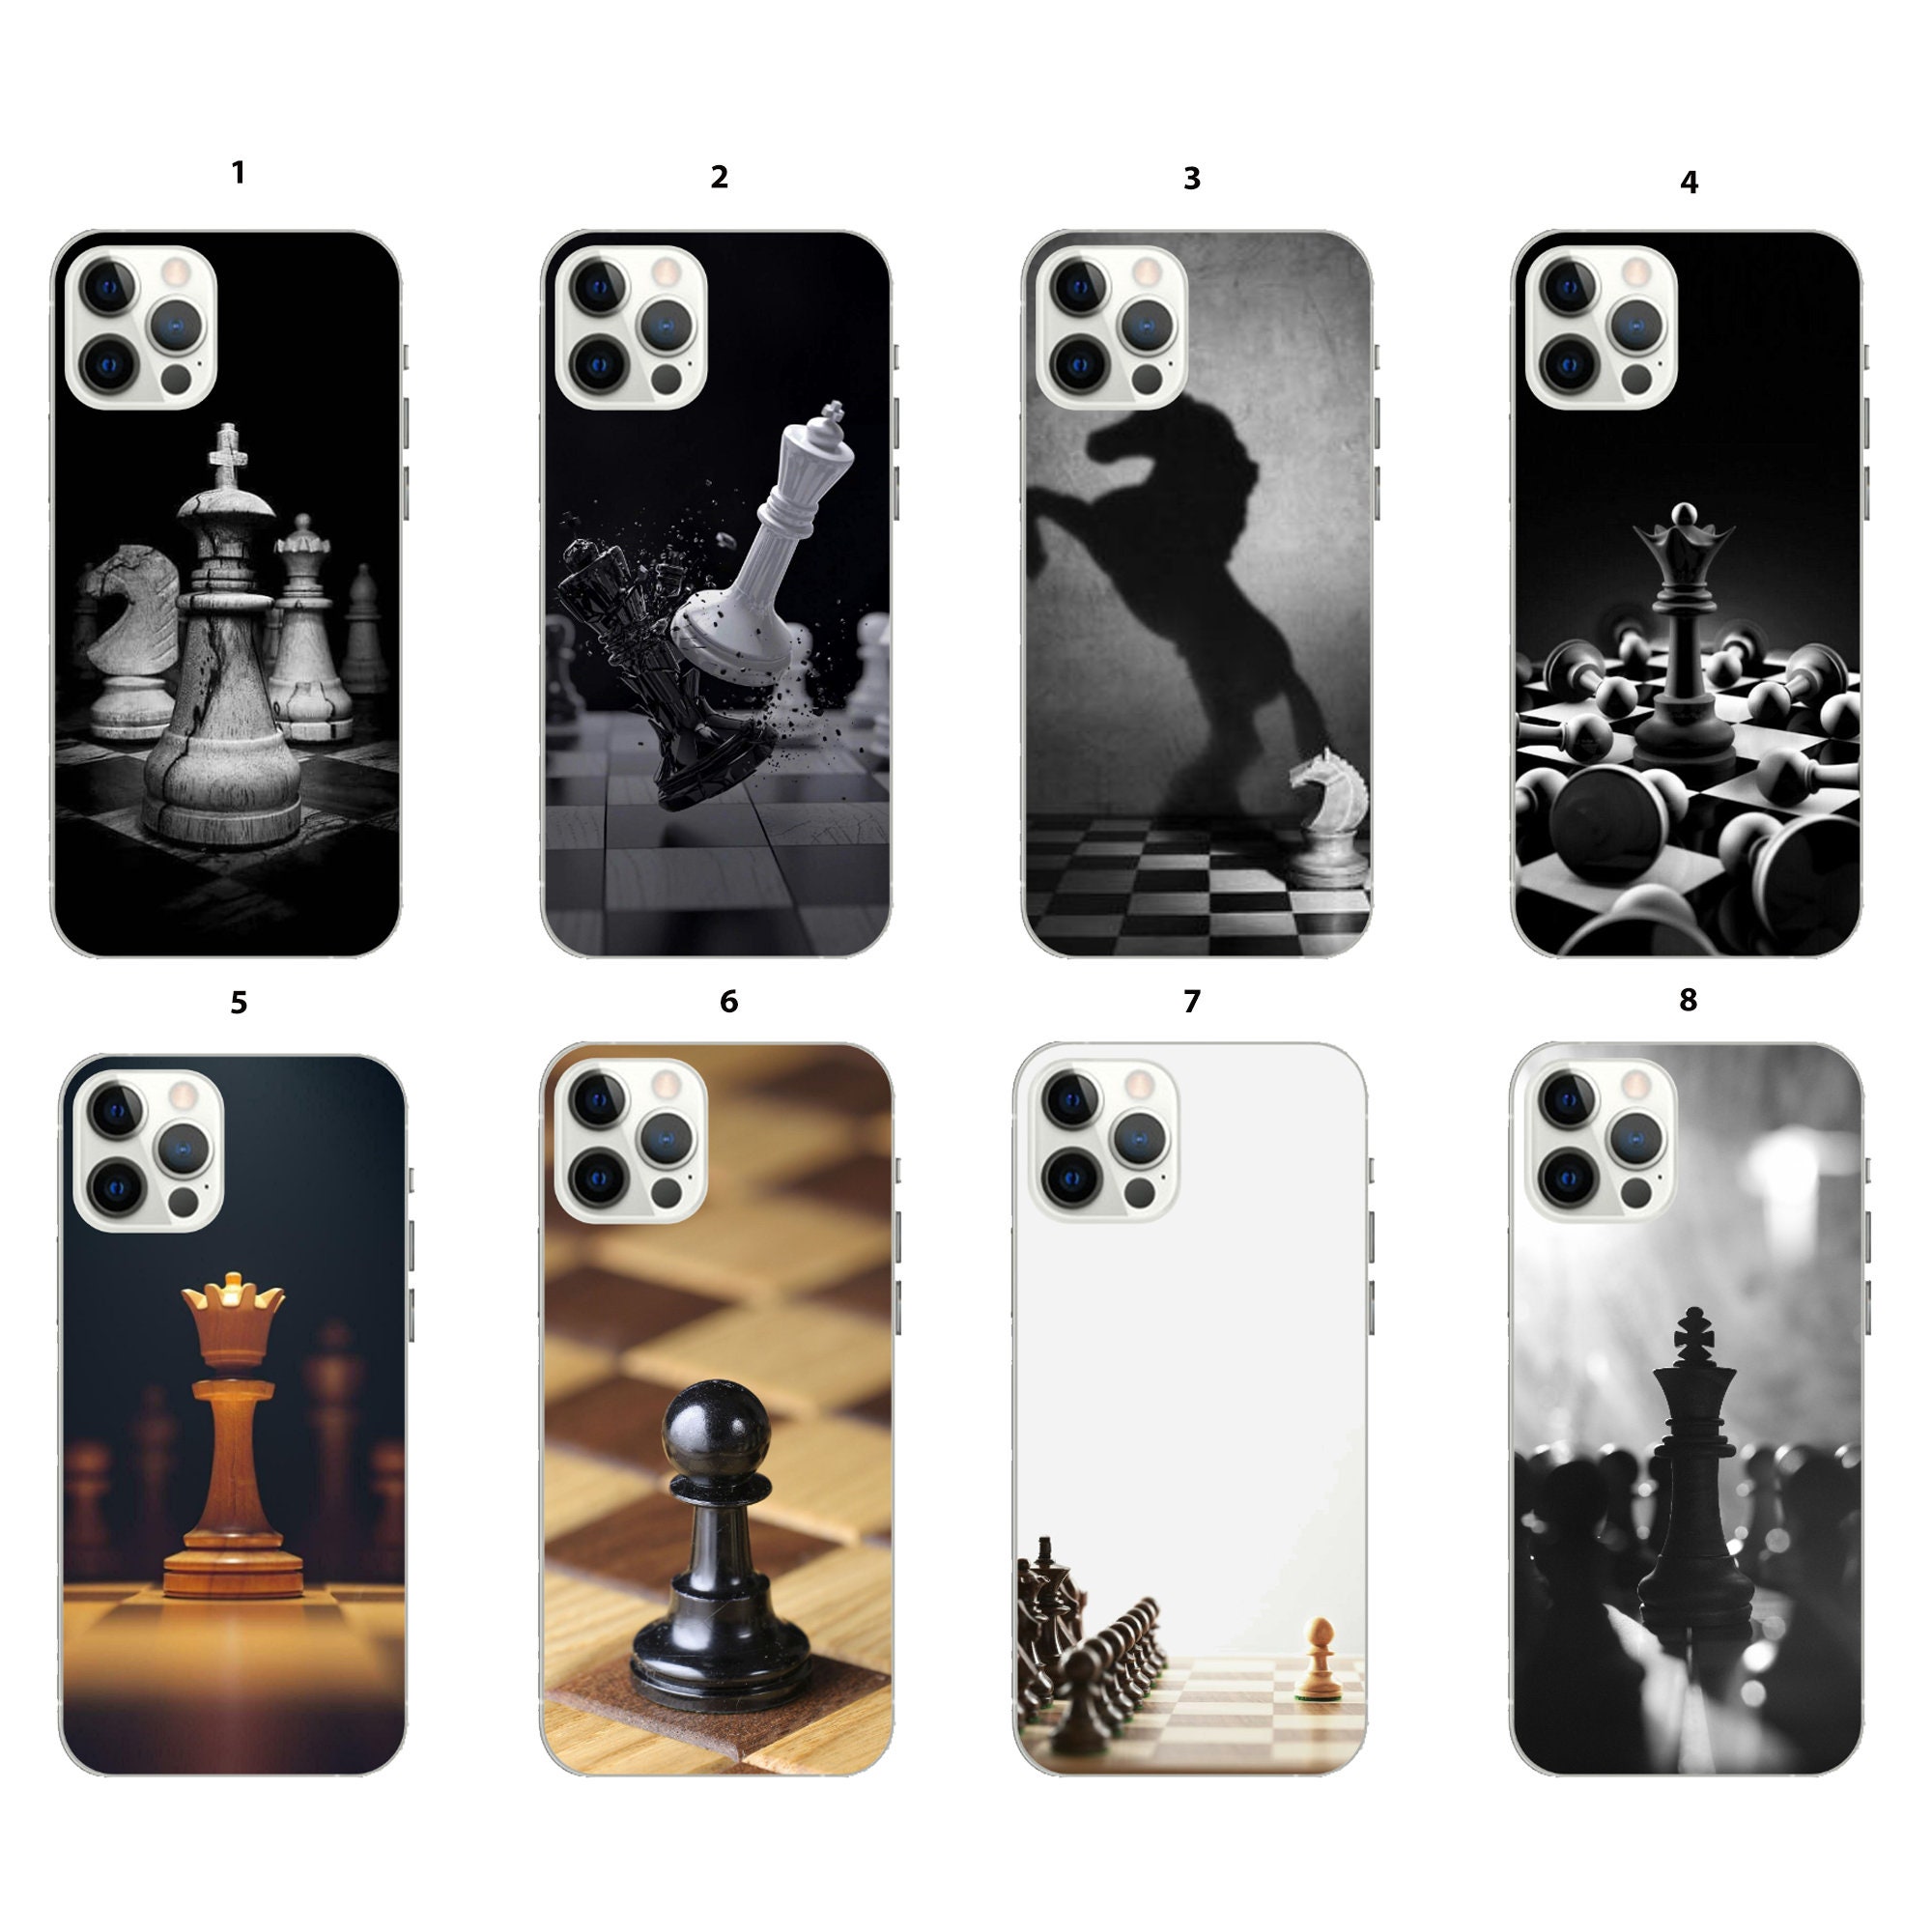 Chess Pieces Galaxy S7 Case by Ton Kinsbergen/science Photo Library -  Science Photo Gallery